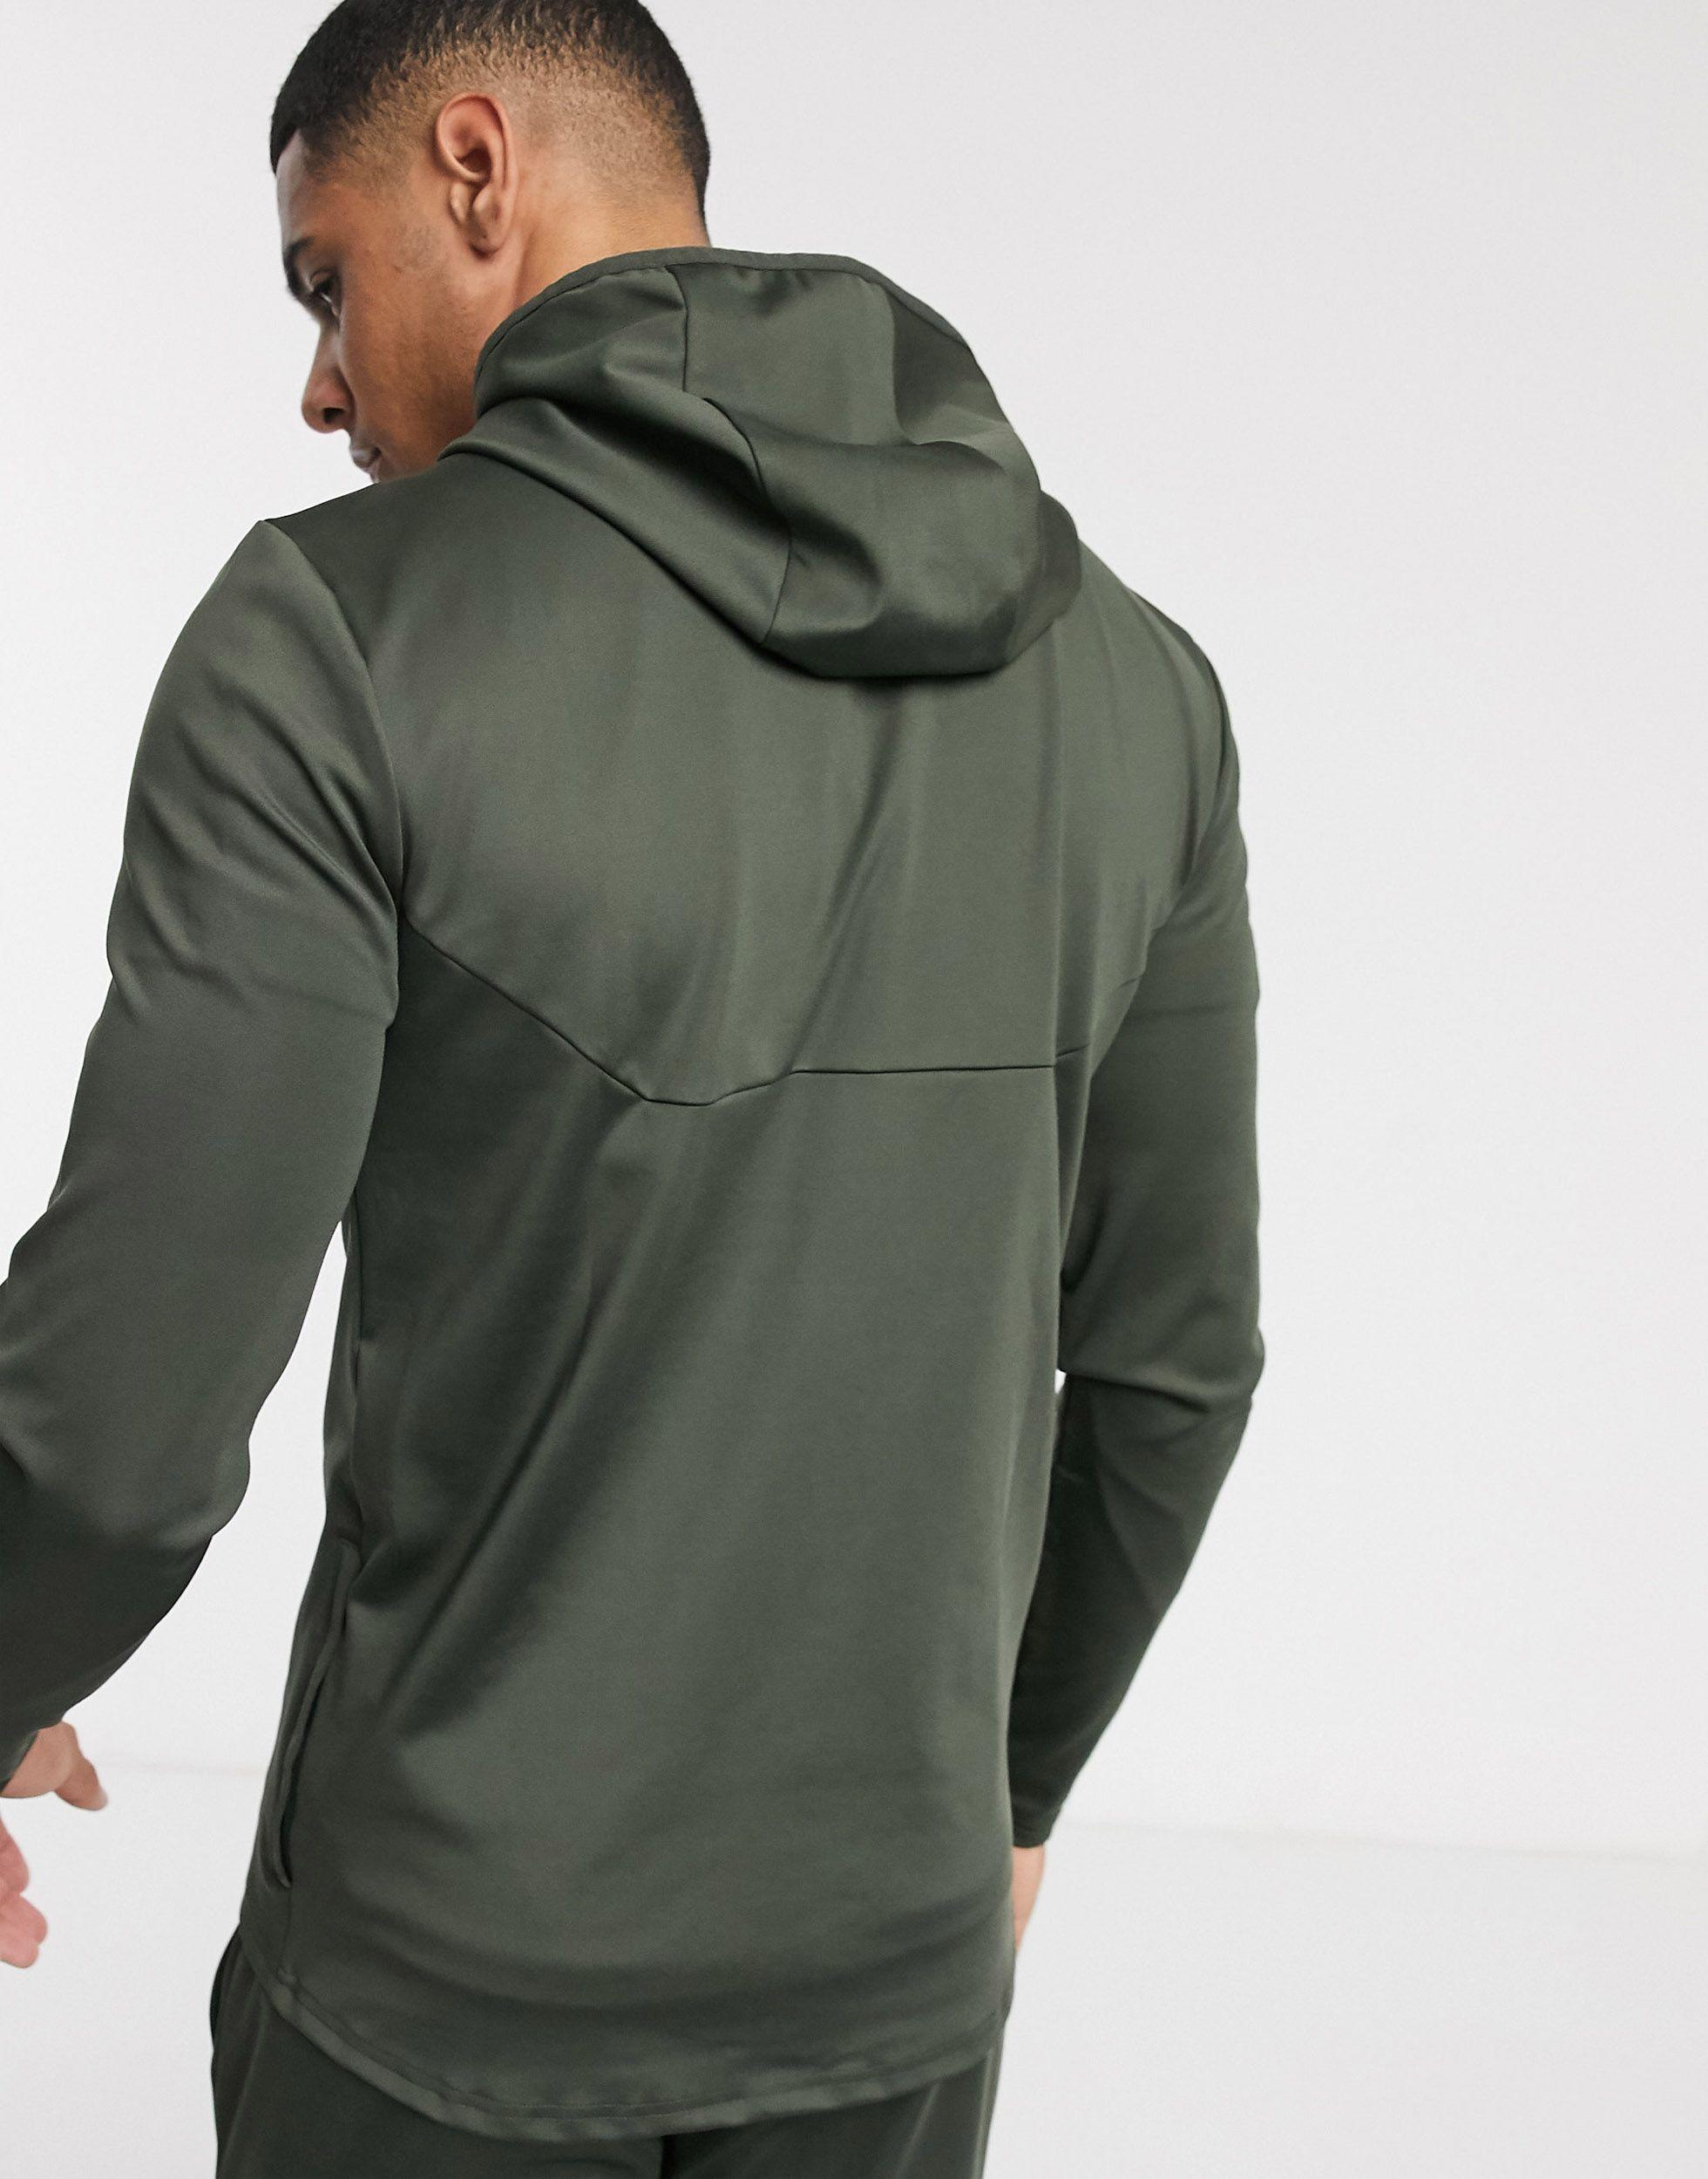 ASOS 4505 Synthetic Icon Muscle Training Hoodie-green for Men - Lyst